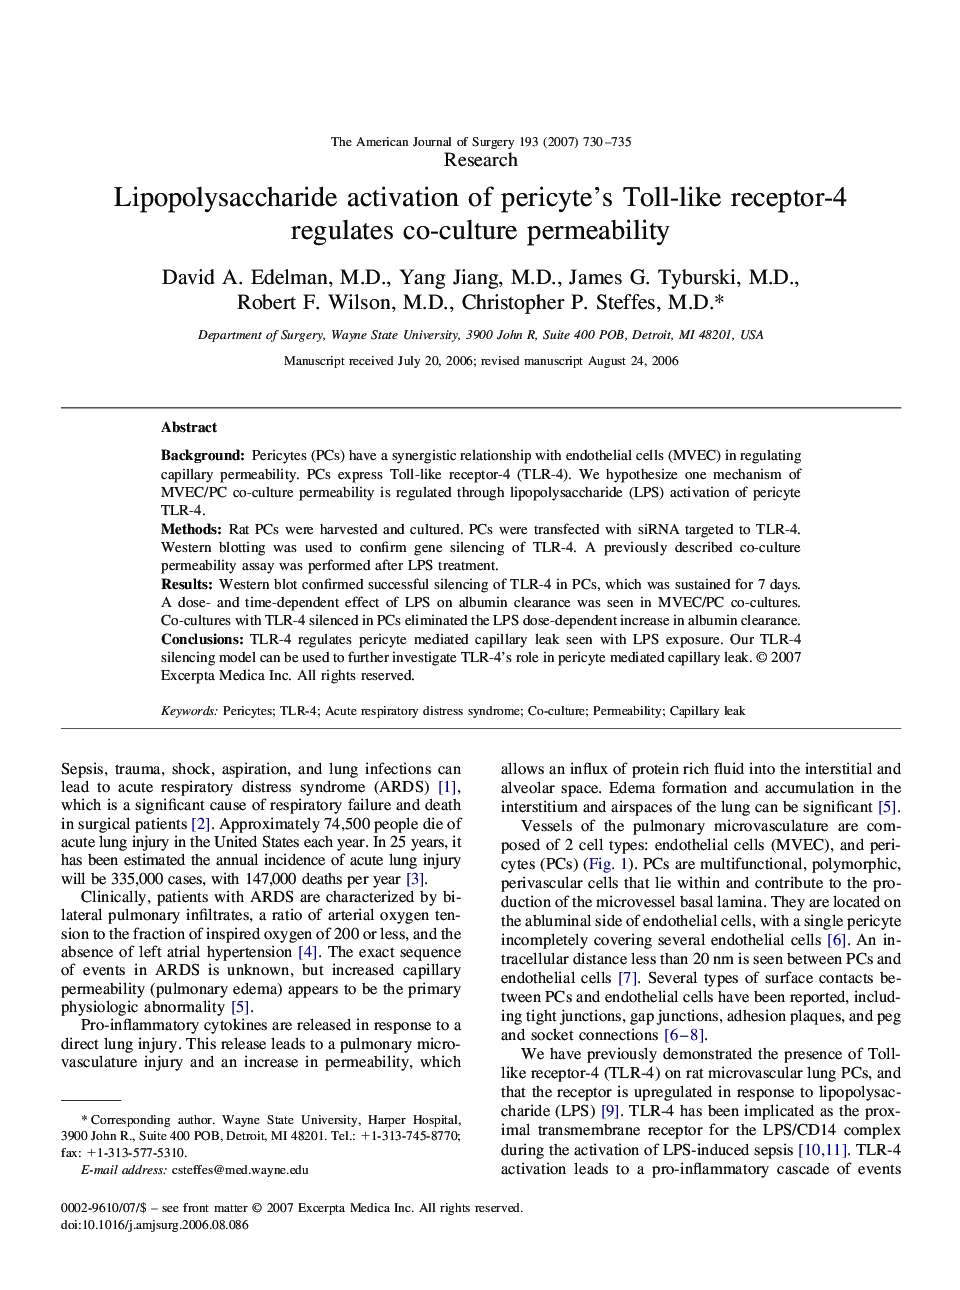 Lipopolysaccharide activation of pericyte’s Toll-like receptor-4 regulates co-culture permeability